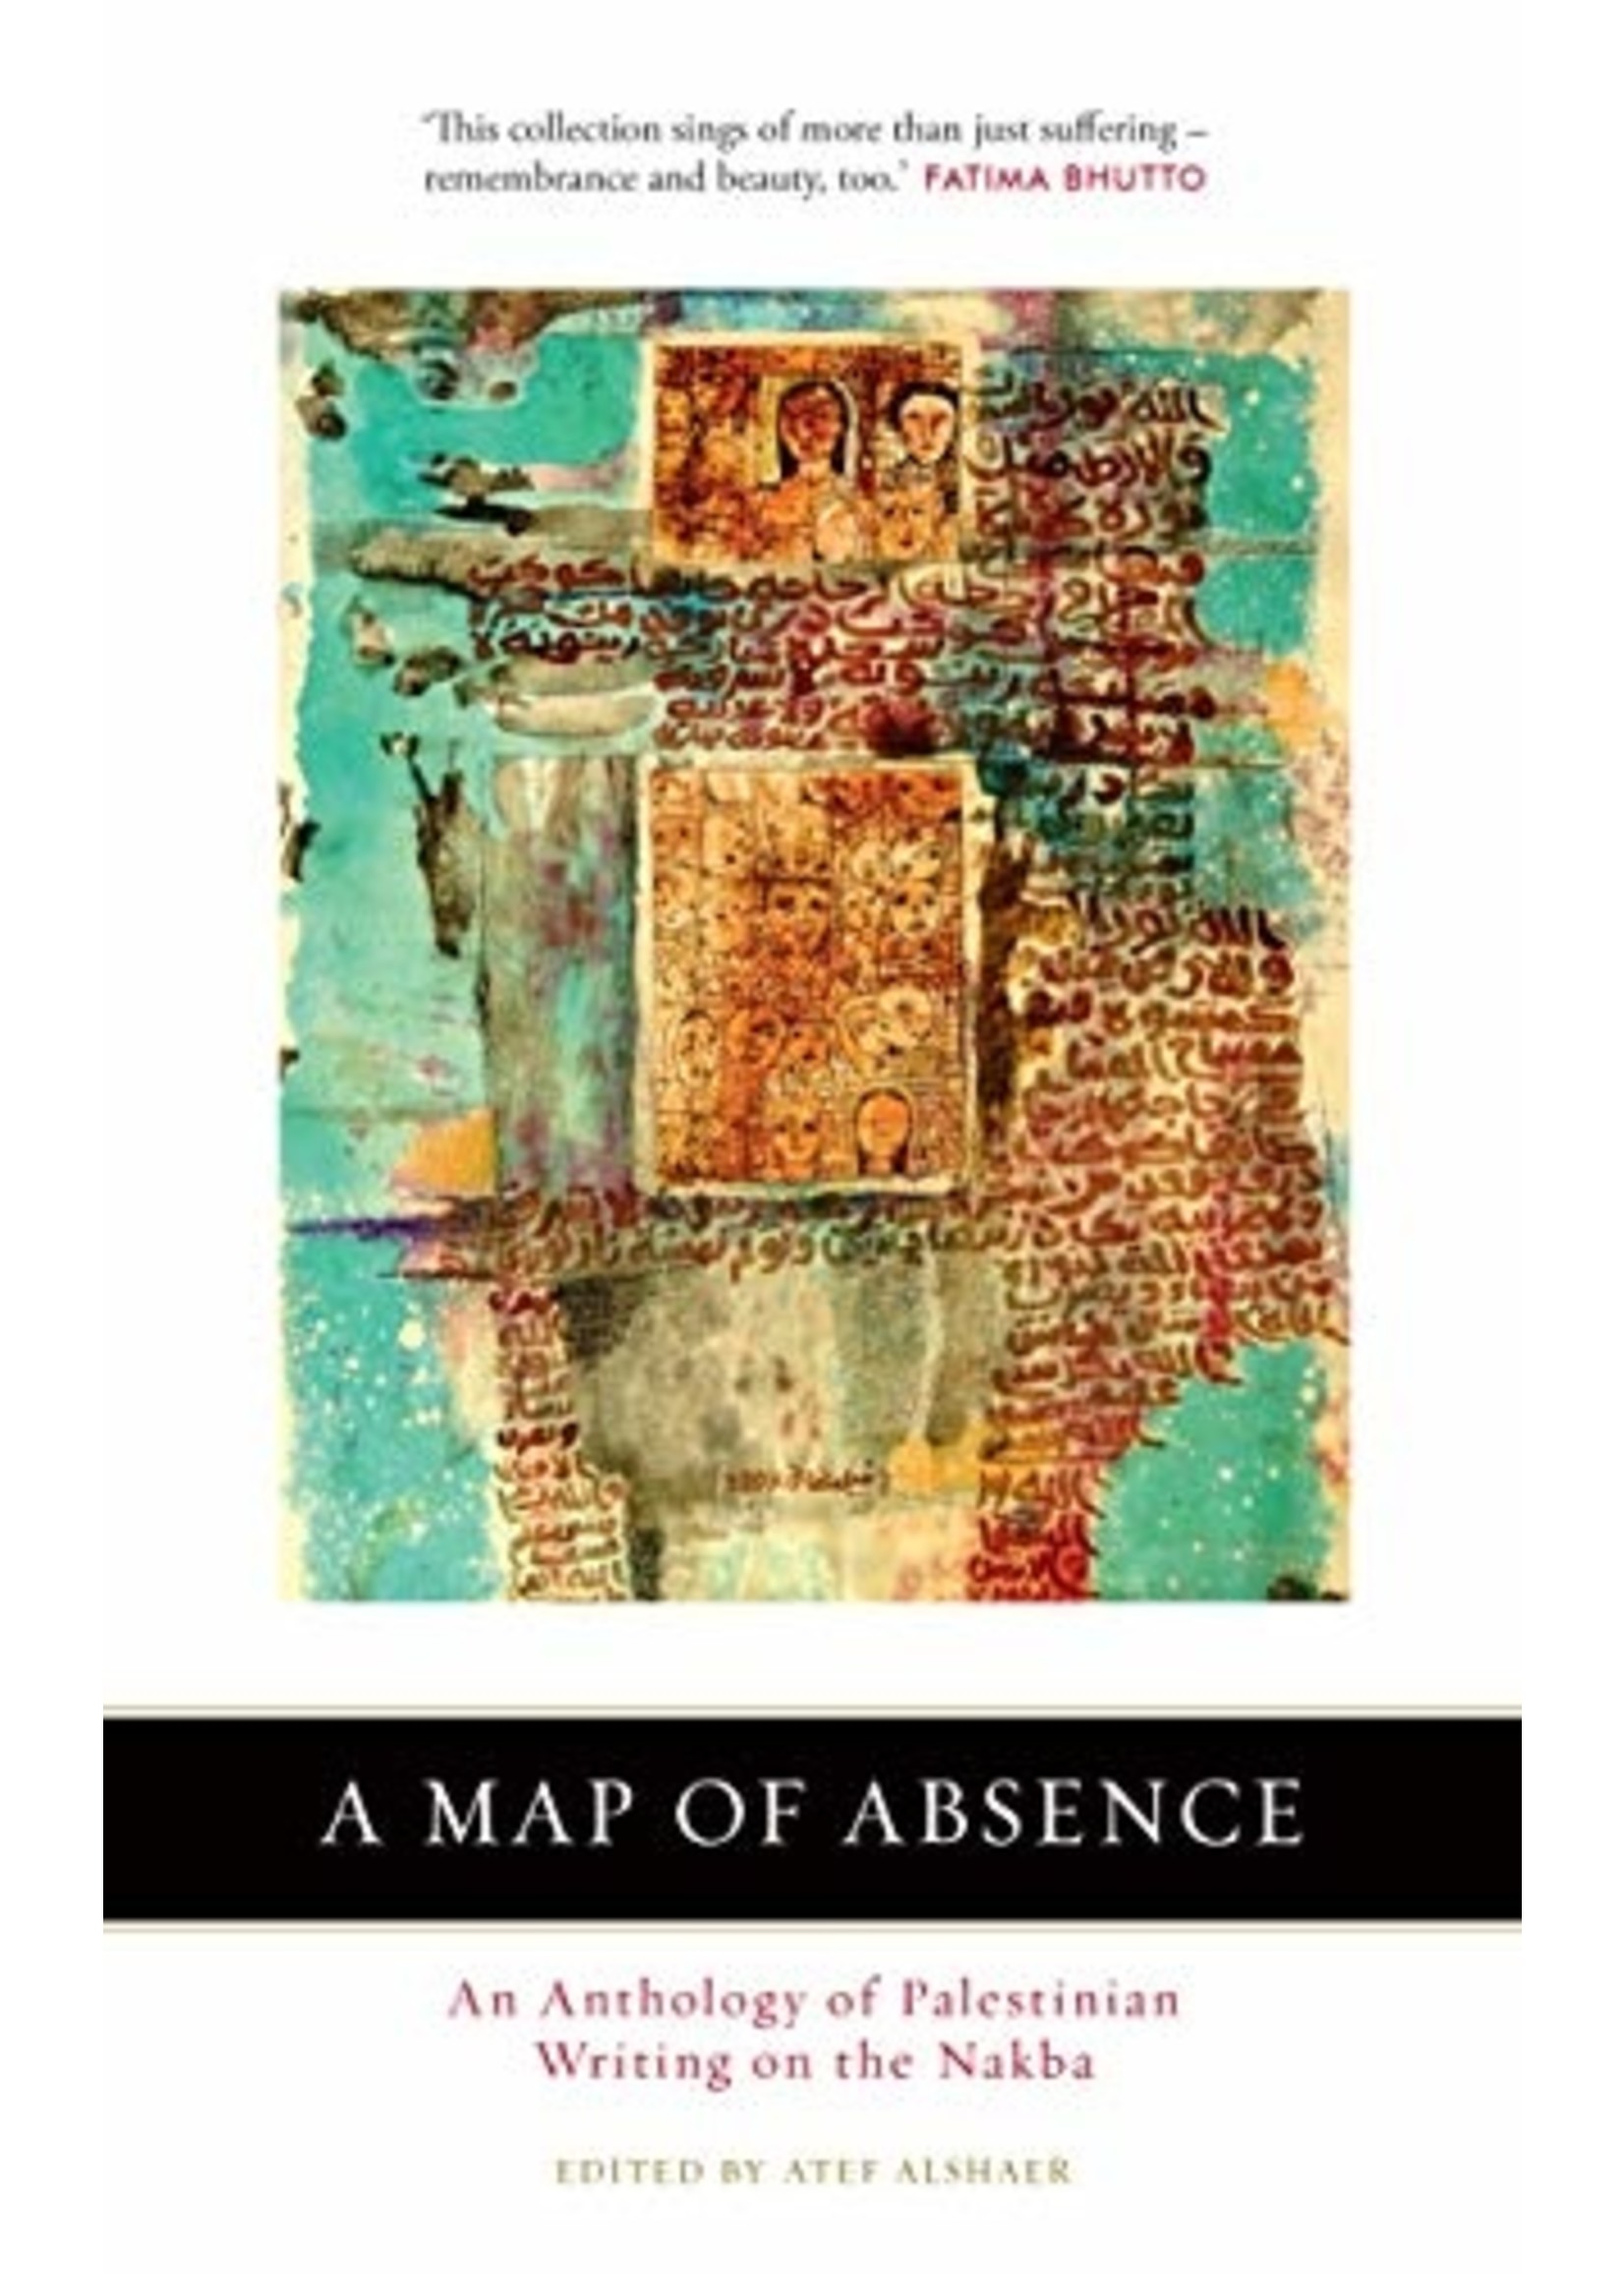 A Map of Absence:  An Anthology of Palestinian Writing on the Nakba